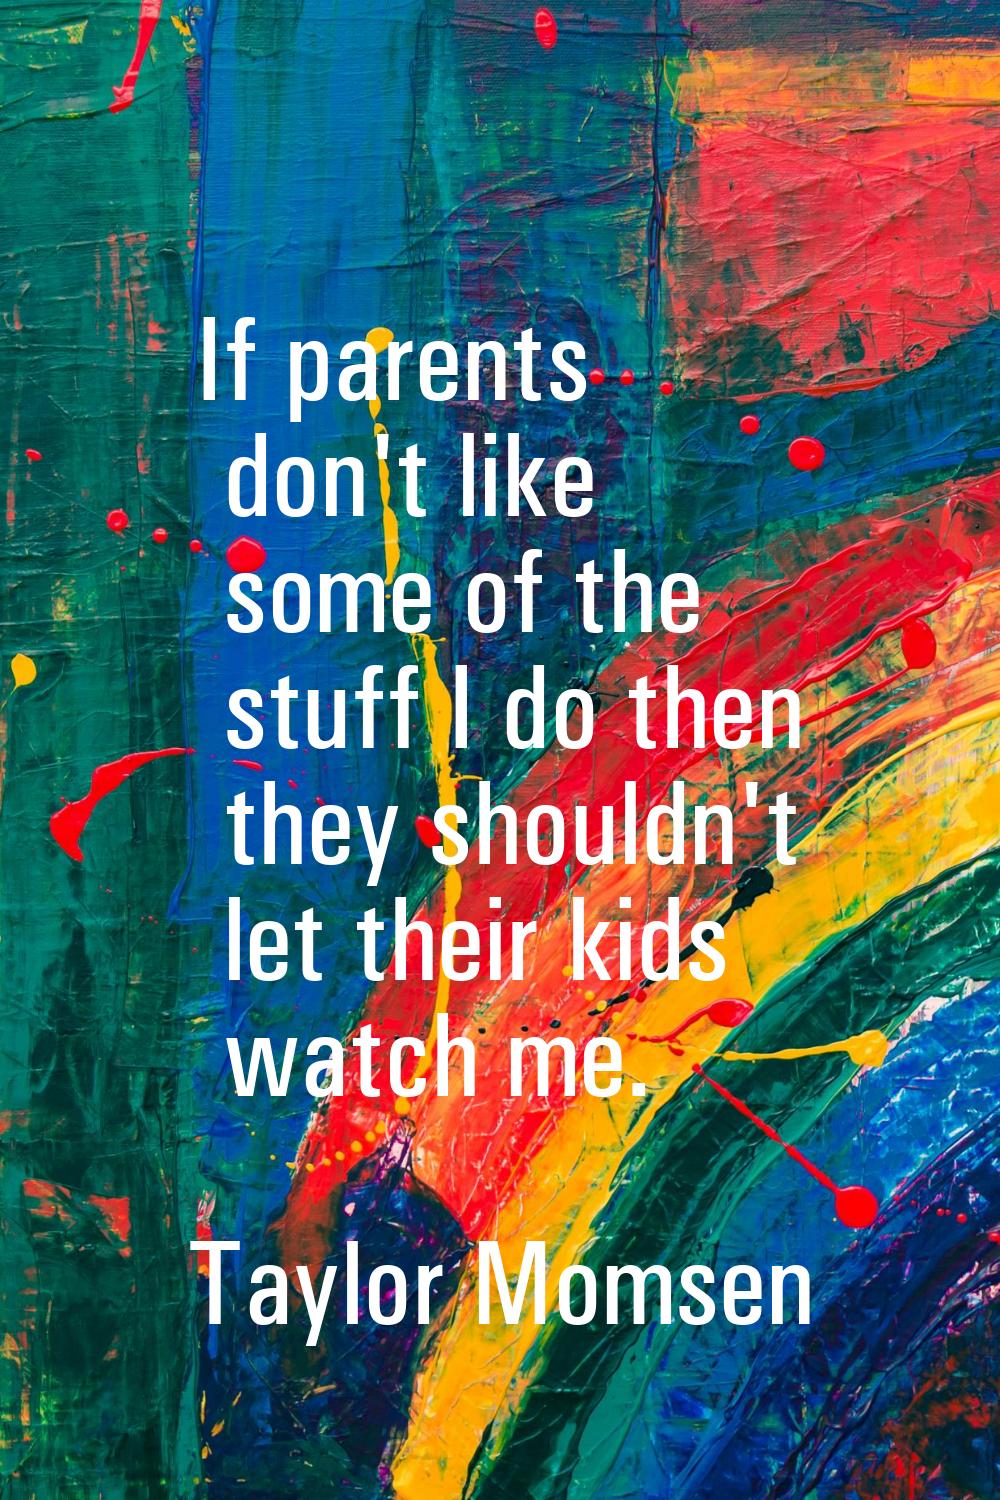 If parents don't like some of the stuff I do then they shouldn't let their kids watch me.